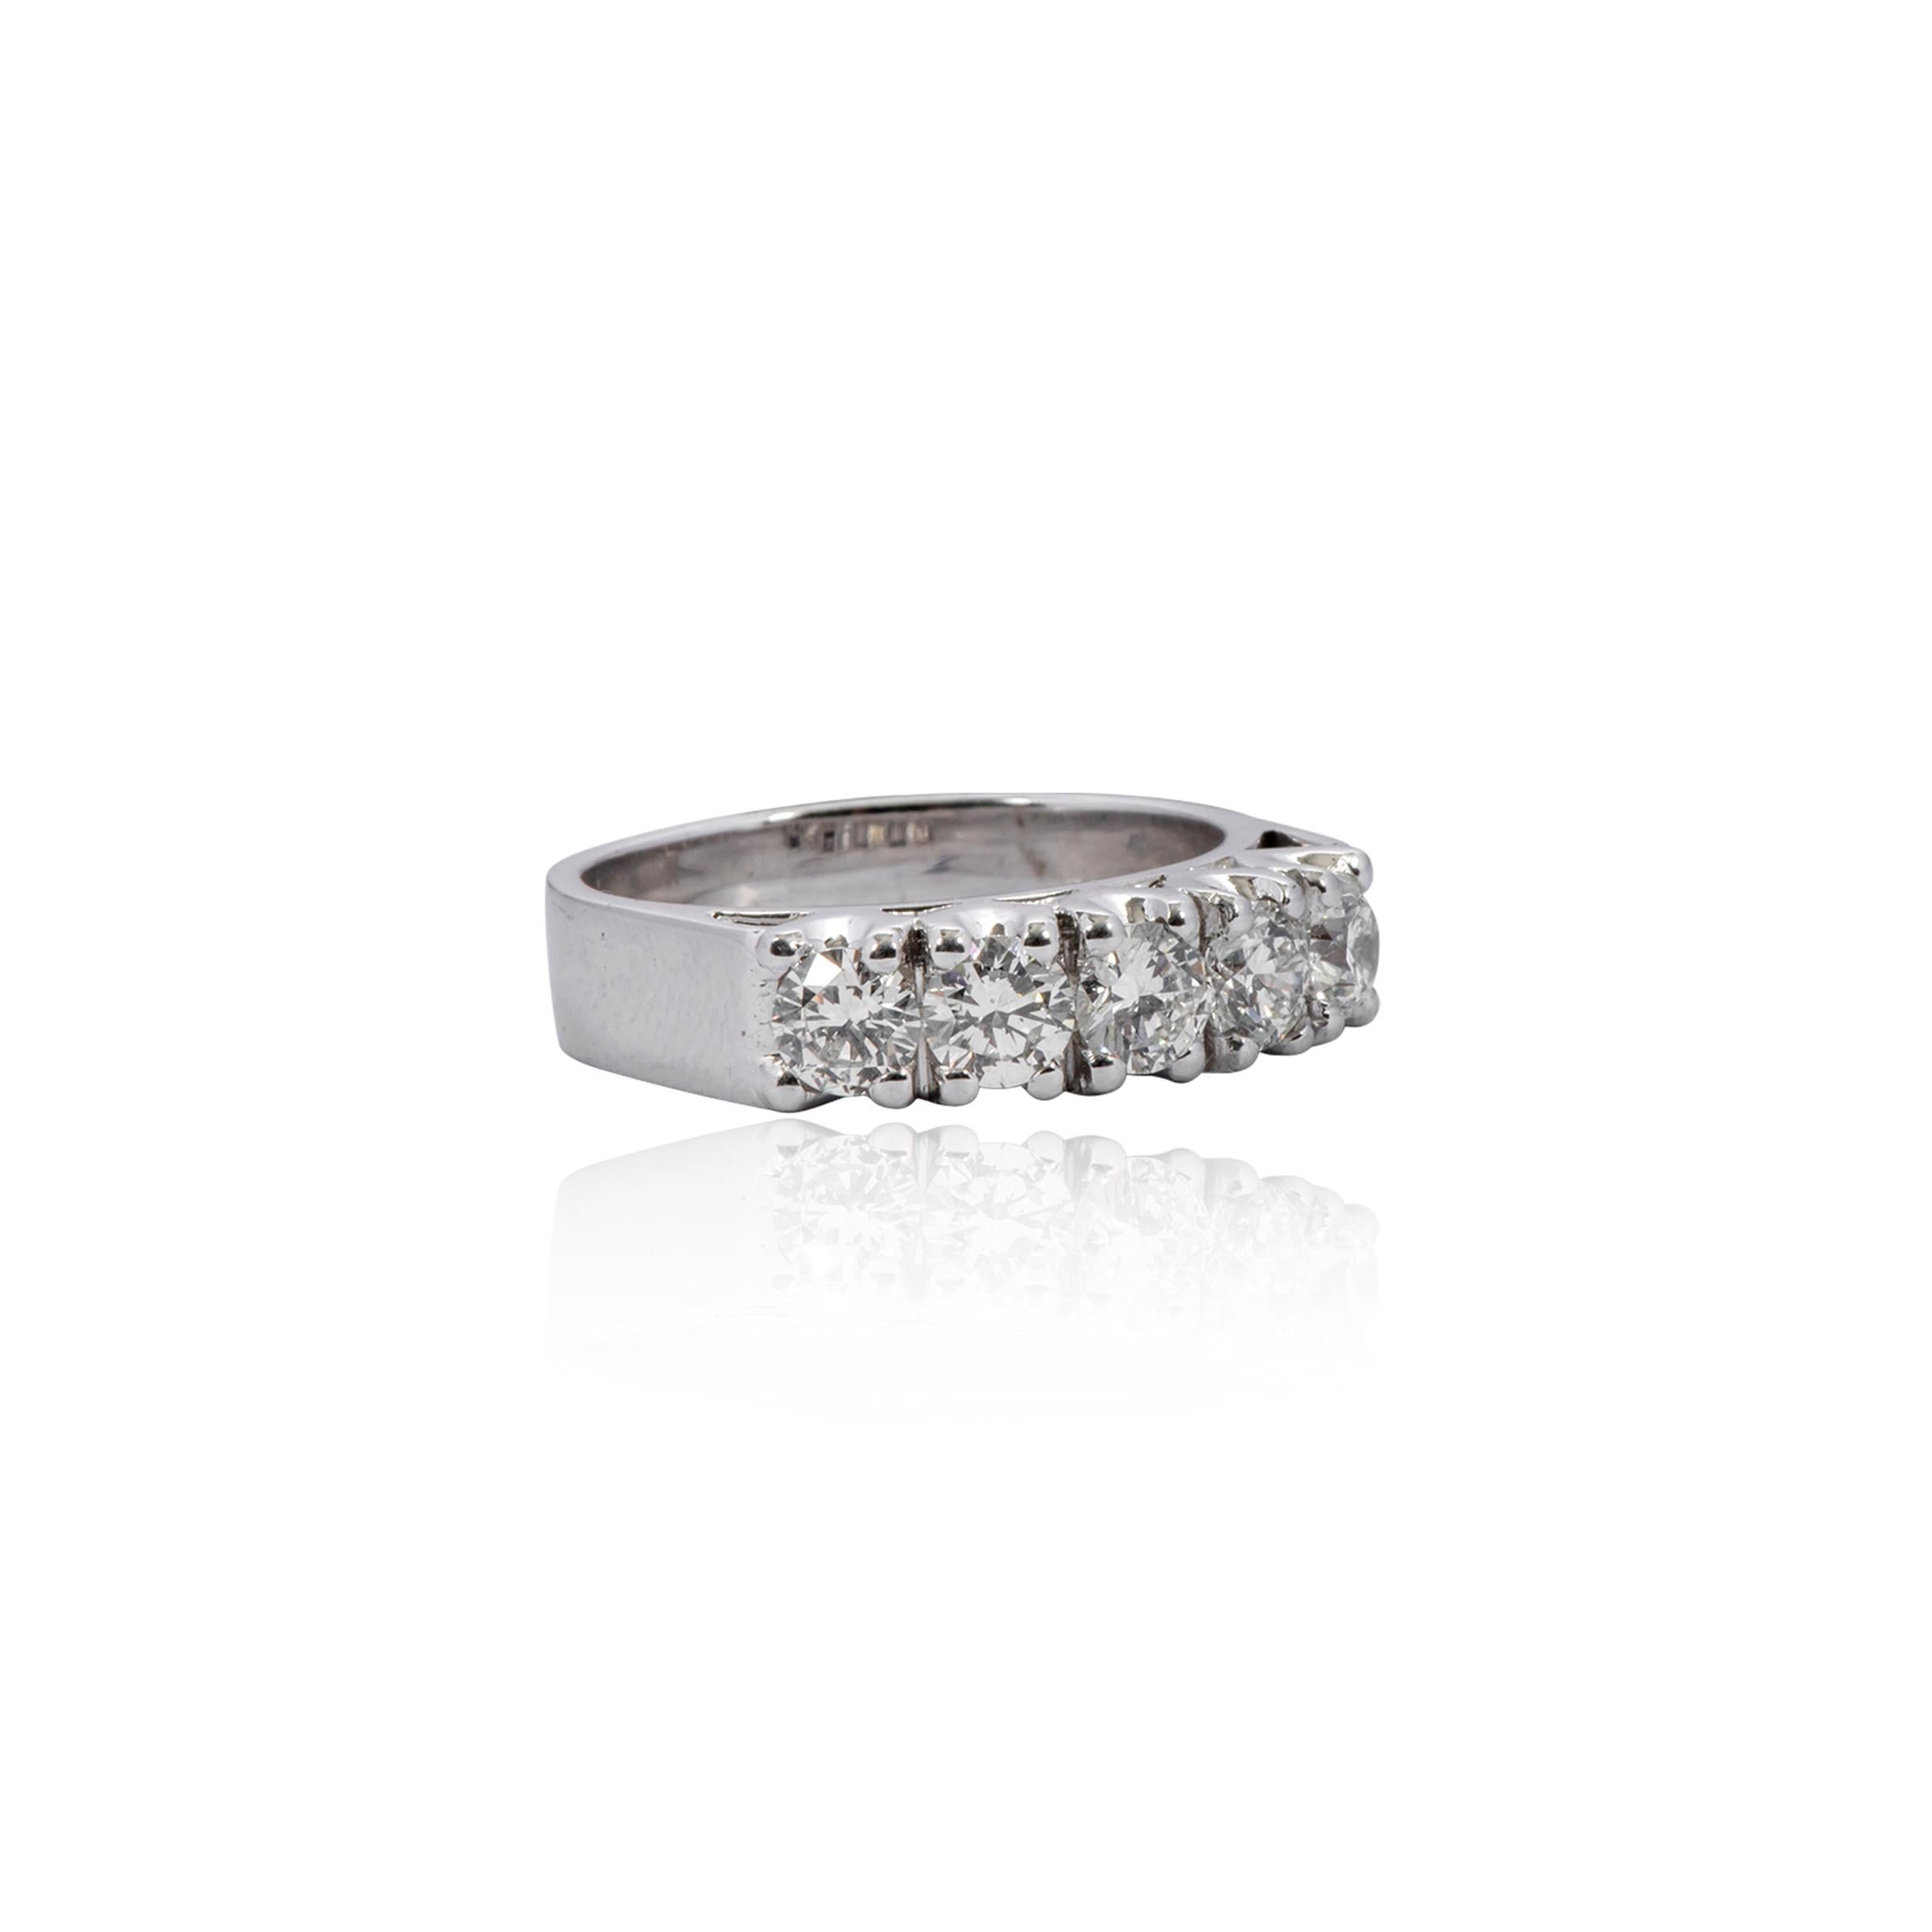 18 Karat White Gold 1.50 Carat Diamond Brilliant-Cut Eternity Band Wedding Ring

This majestic solitaire round diamond band is timeless. The ideal matching 5 solitaire brilliant-cut round diamonds of 0.30 pointers each held in the classic four prong